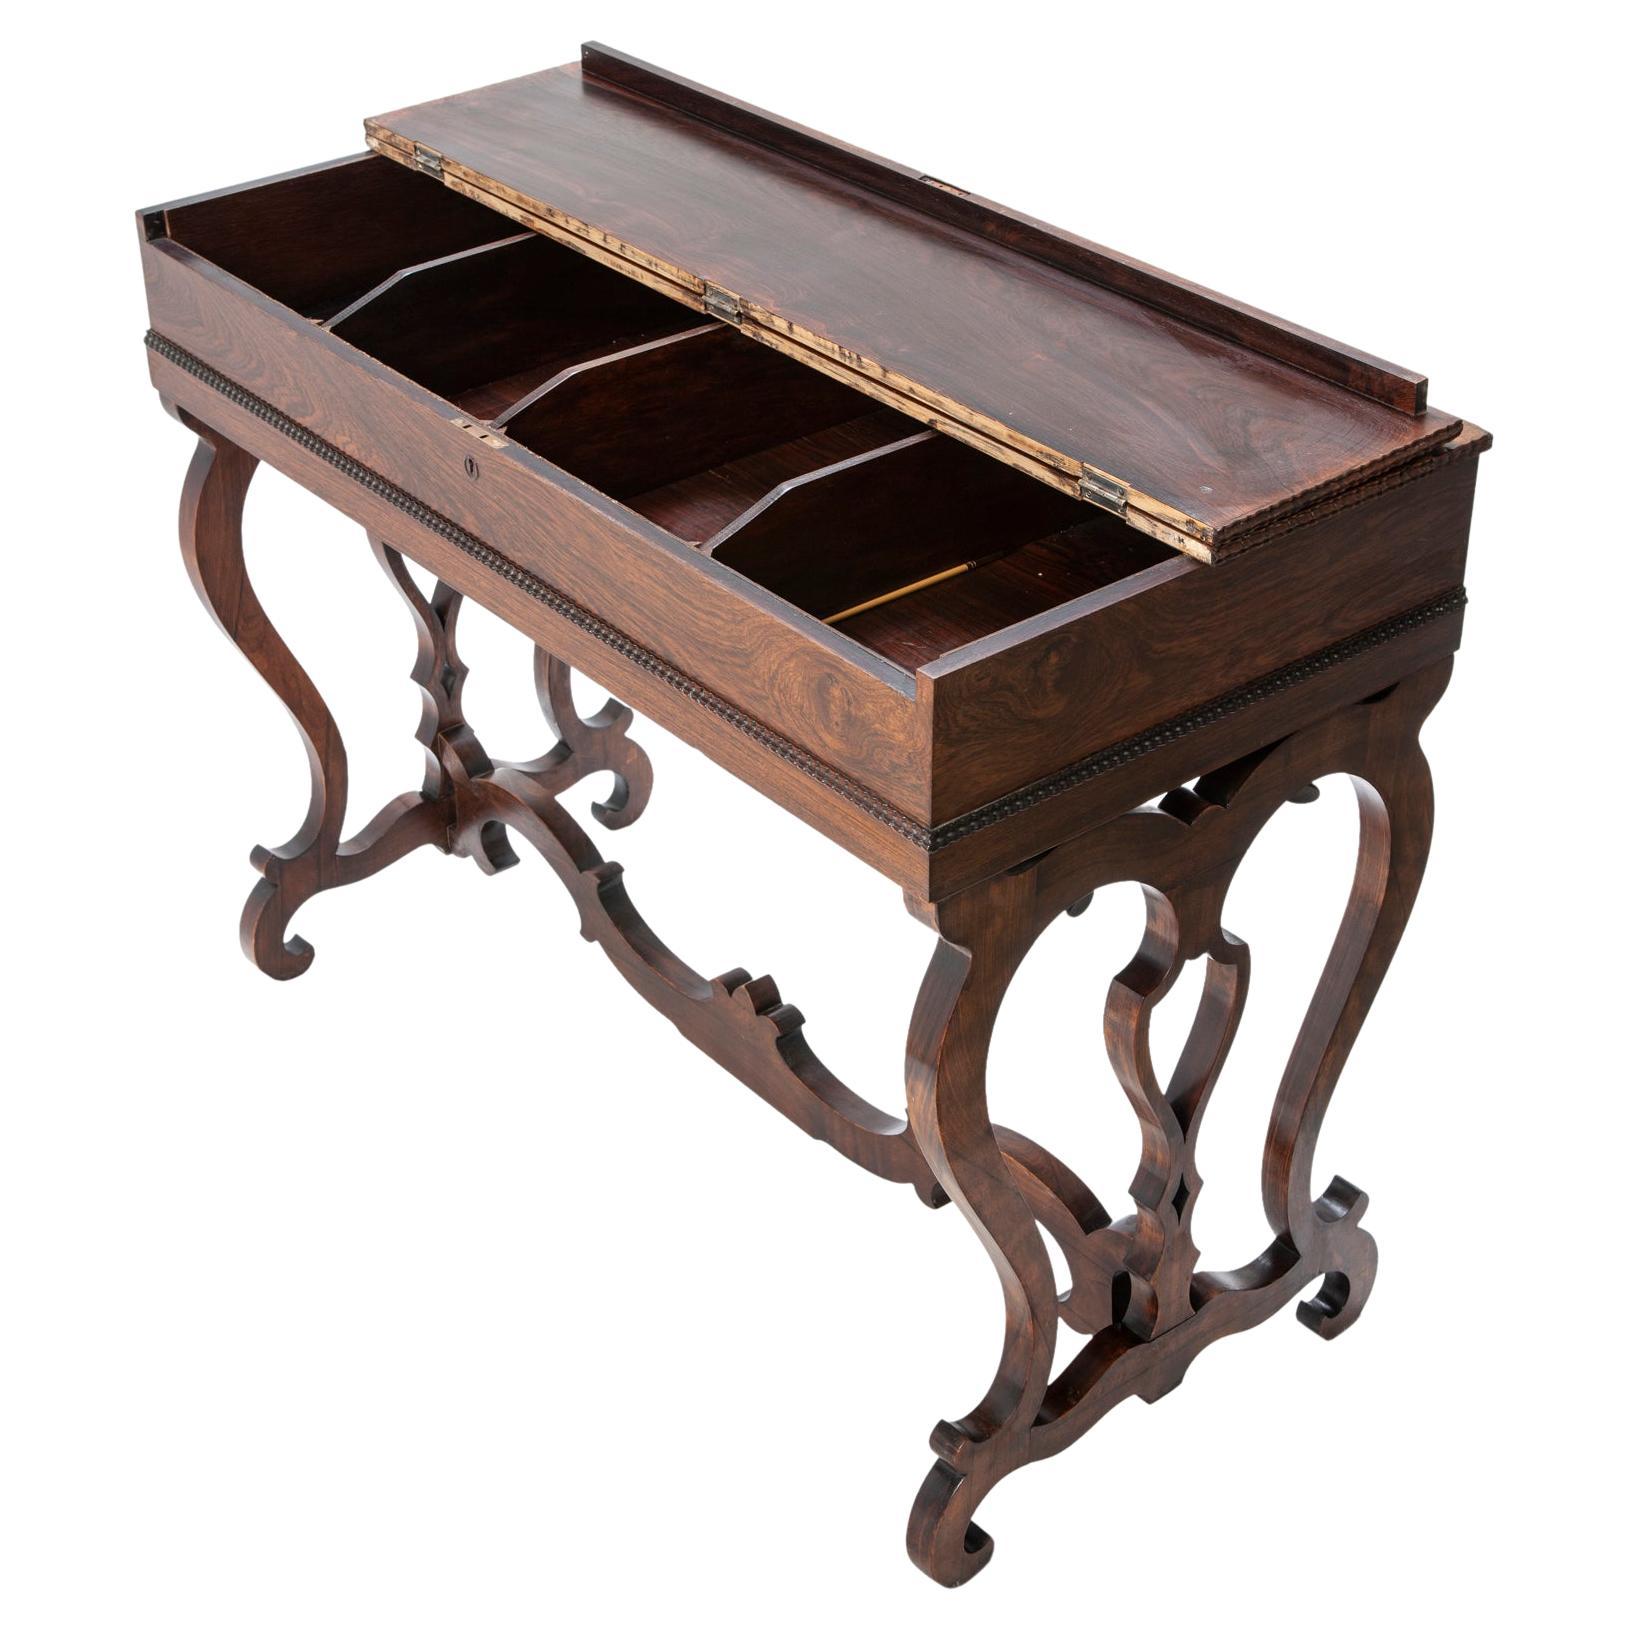 Antique European rosewood writing table. Hidden beneath the flip top, a desk in excellent condition. Stunning stretchers & base. This piece is in remarkable pristine condition., there are 4 roomy compartments under the lid.
